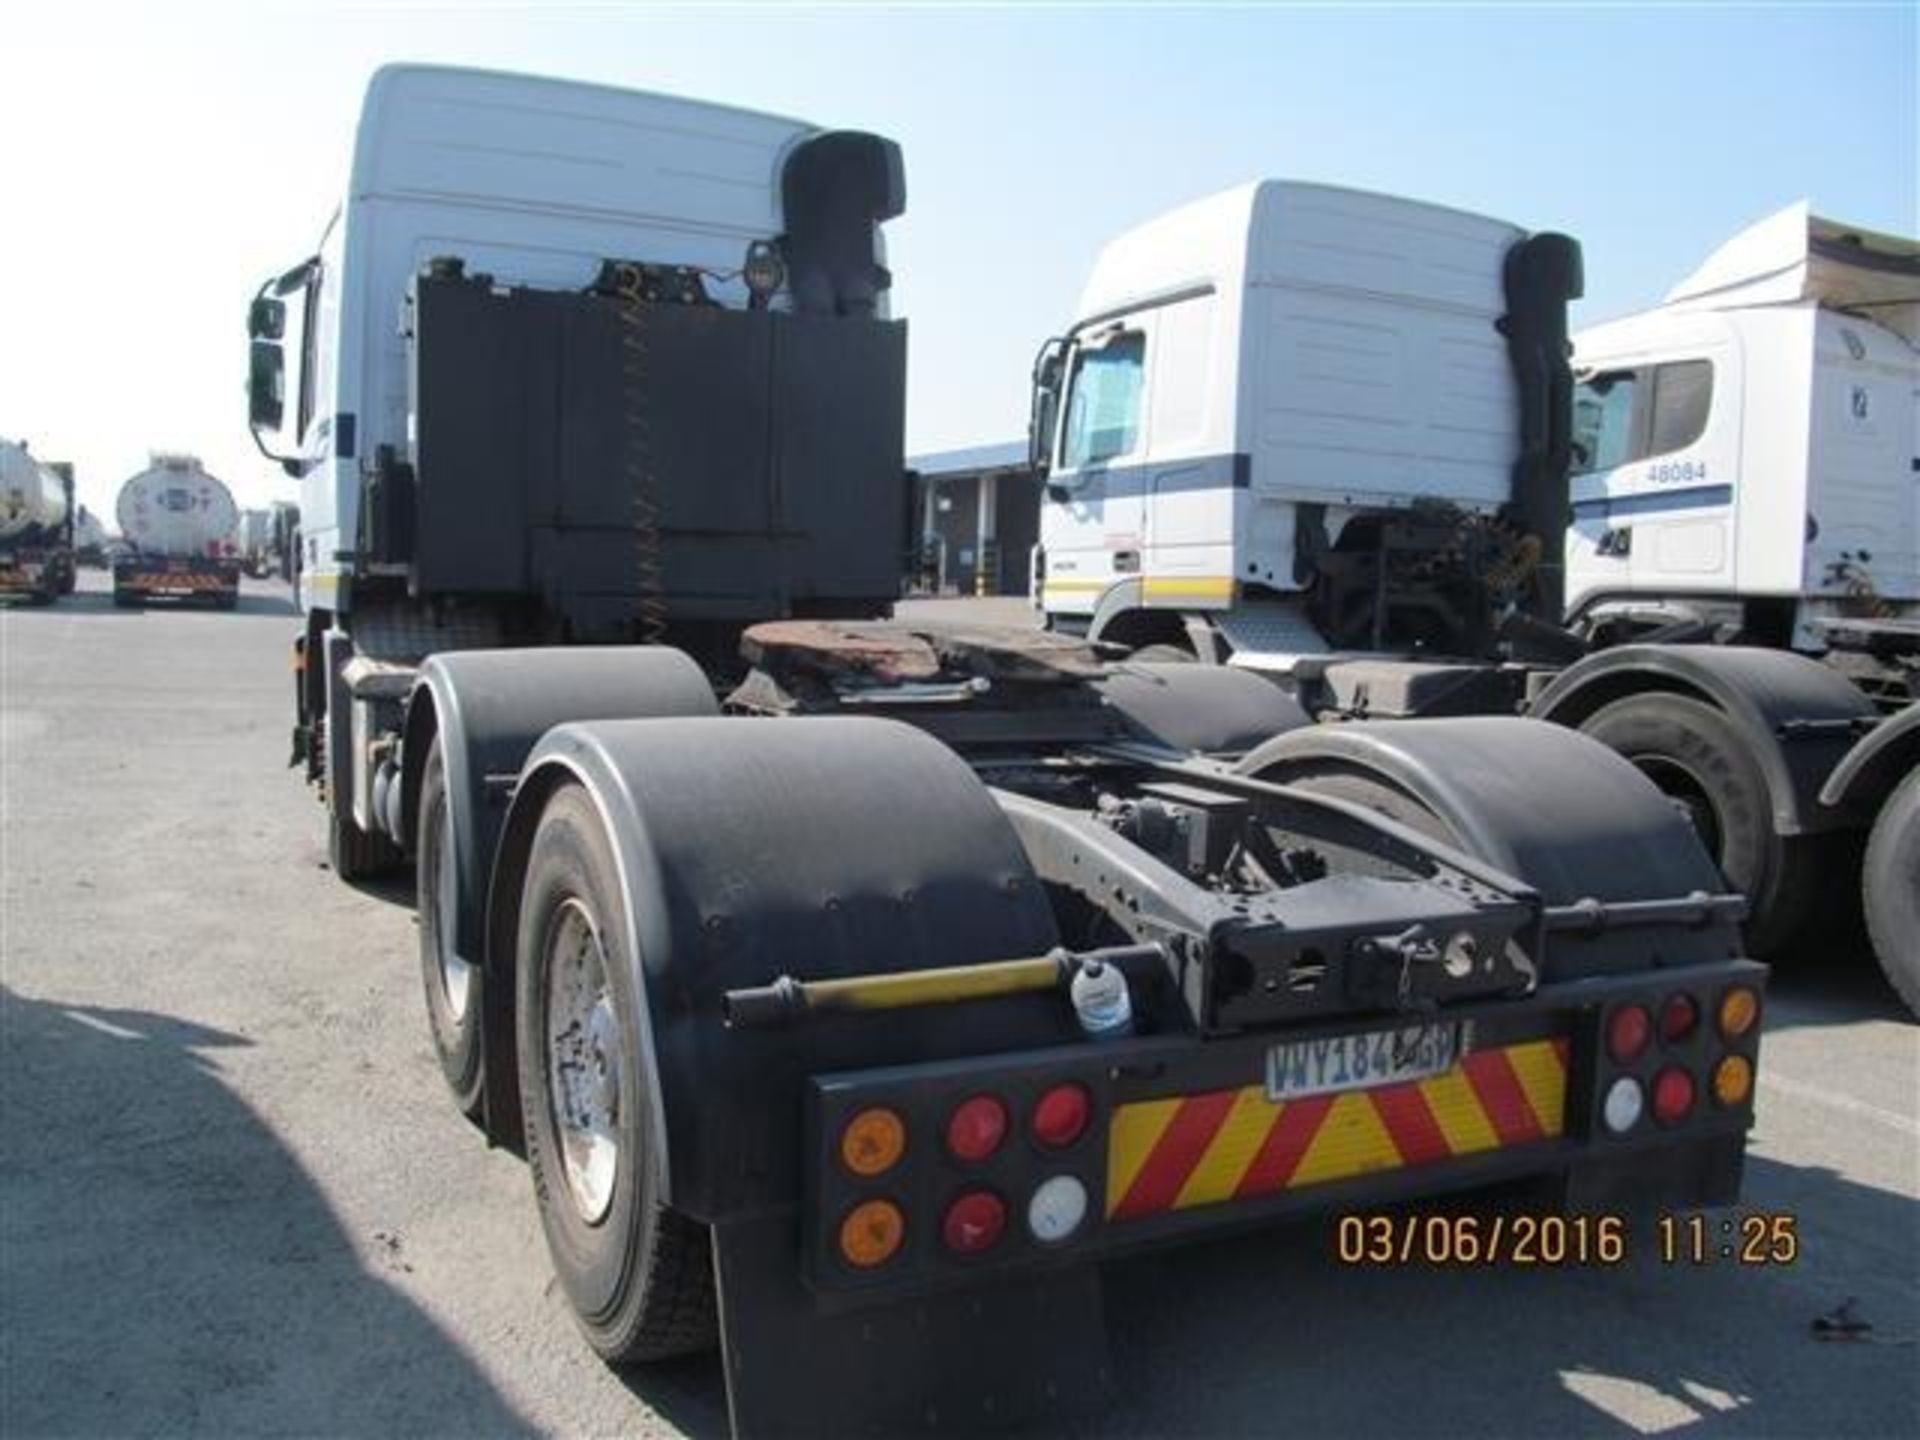 2007 M/BENZ ACTROS 2648 6X4 T/T - (VWY184GP) - Image 8 of 8